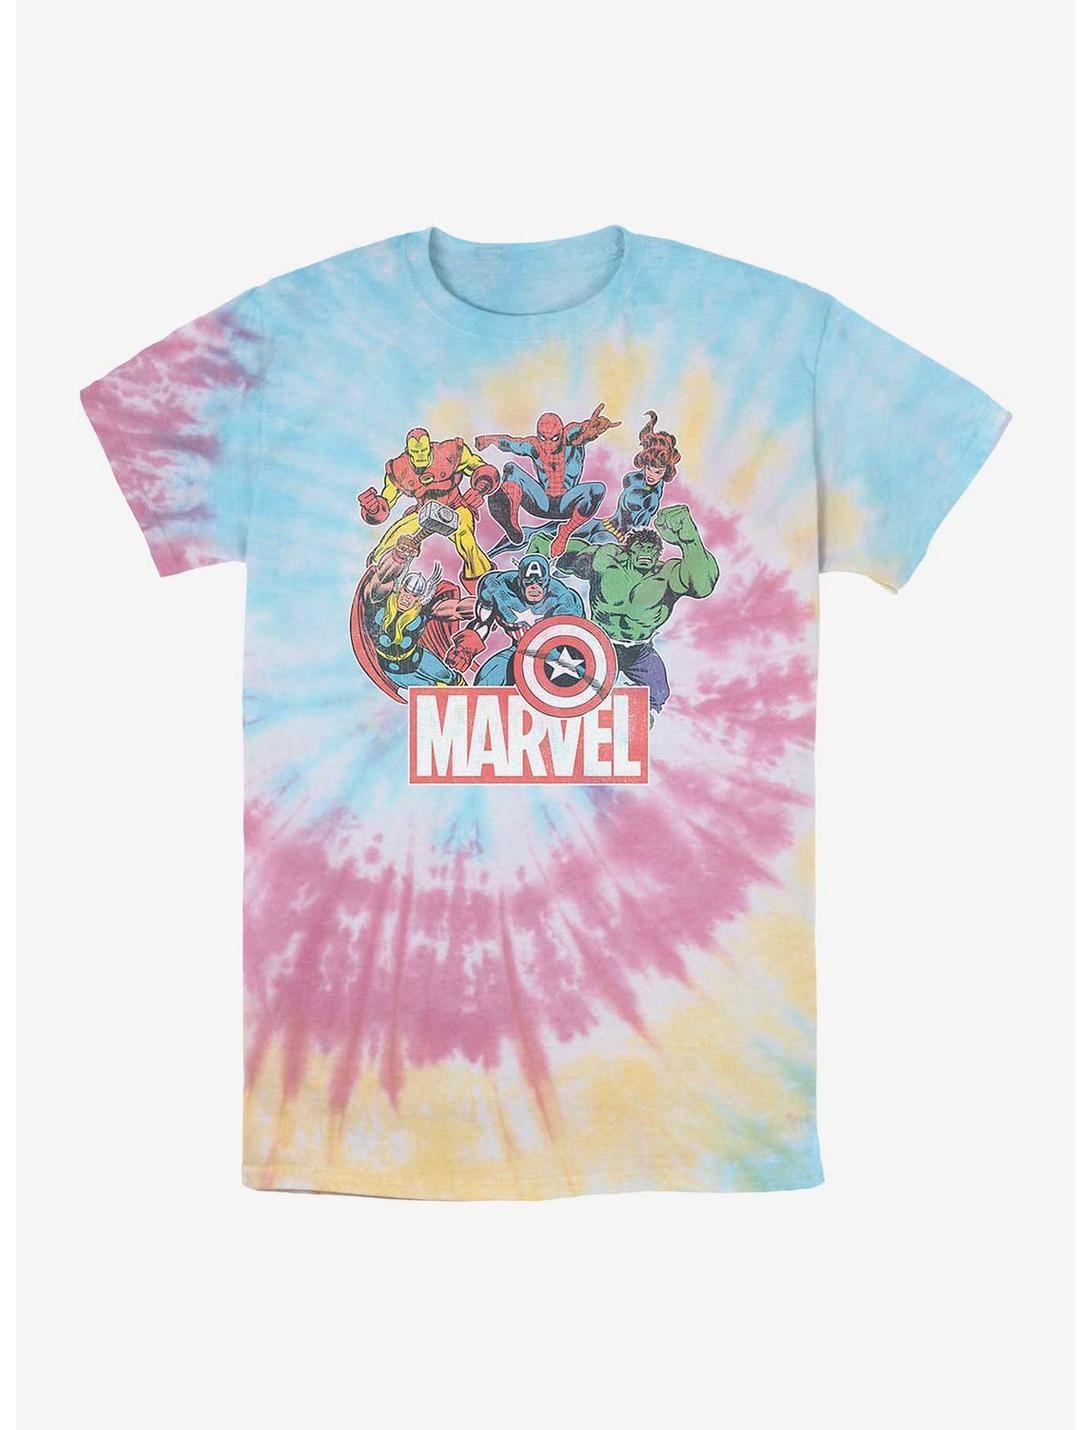 Marvel Avengers Heroes Of Today Tie-Dye T-Shirt, BLUPNKLY, hi-res